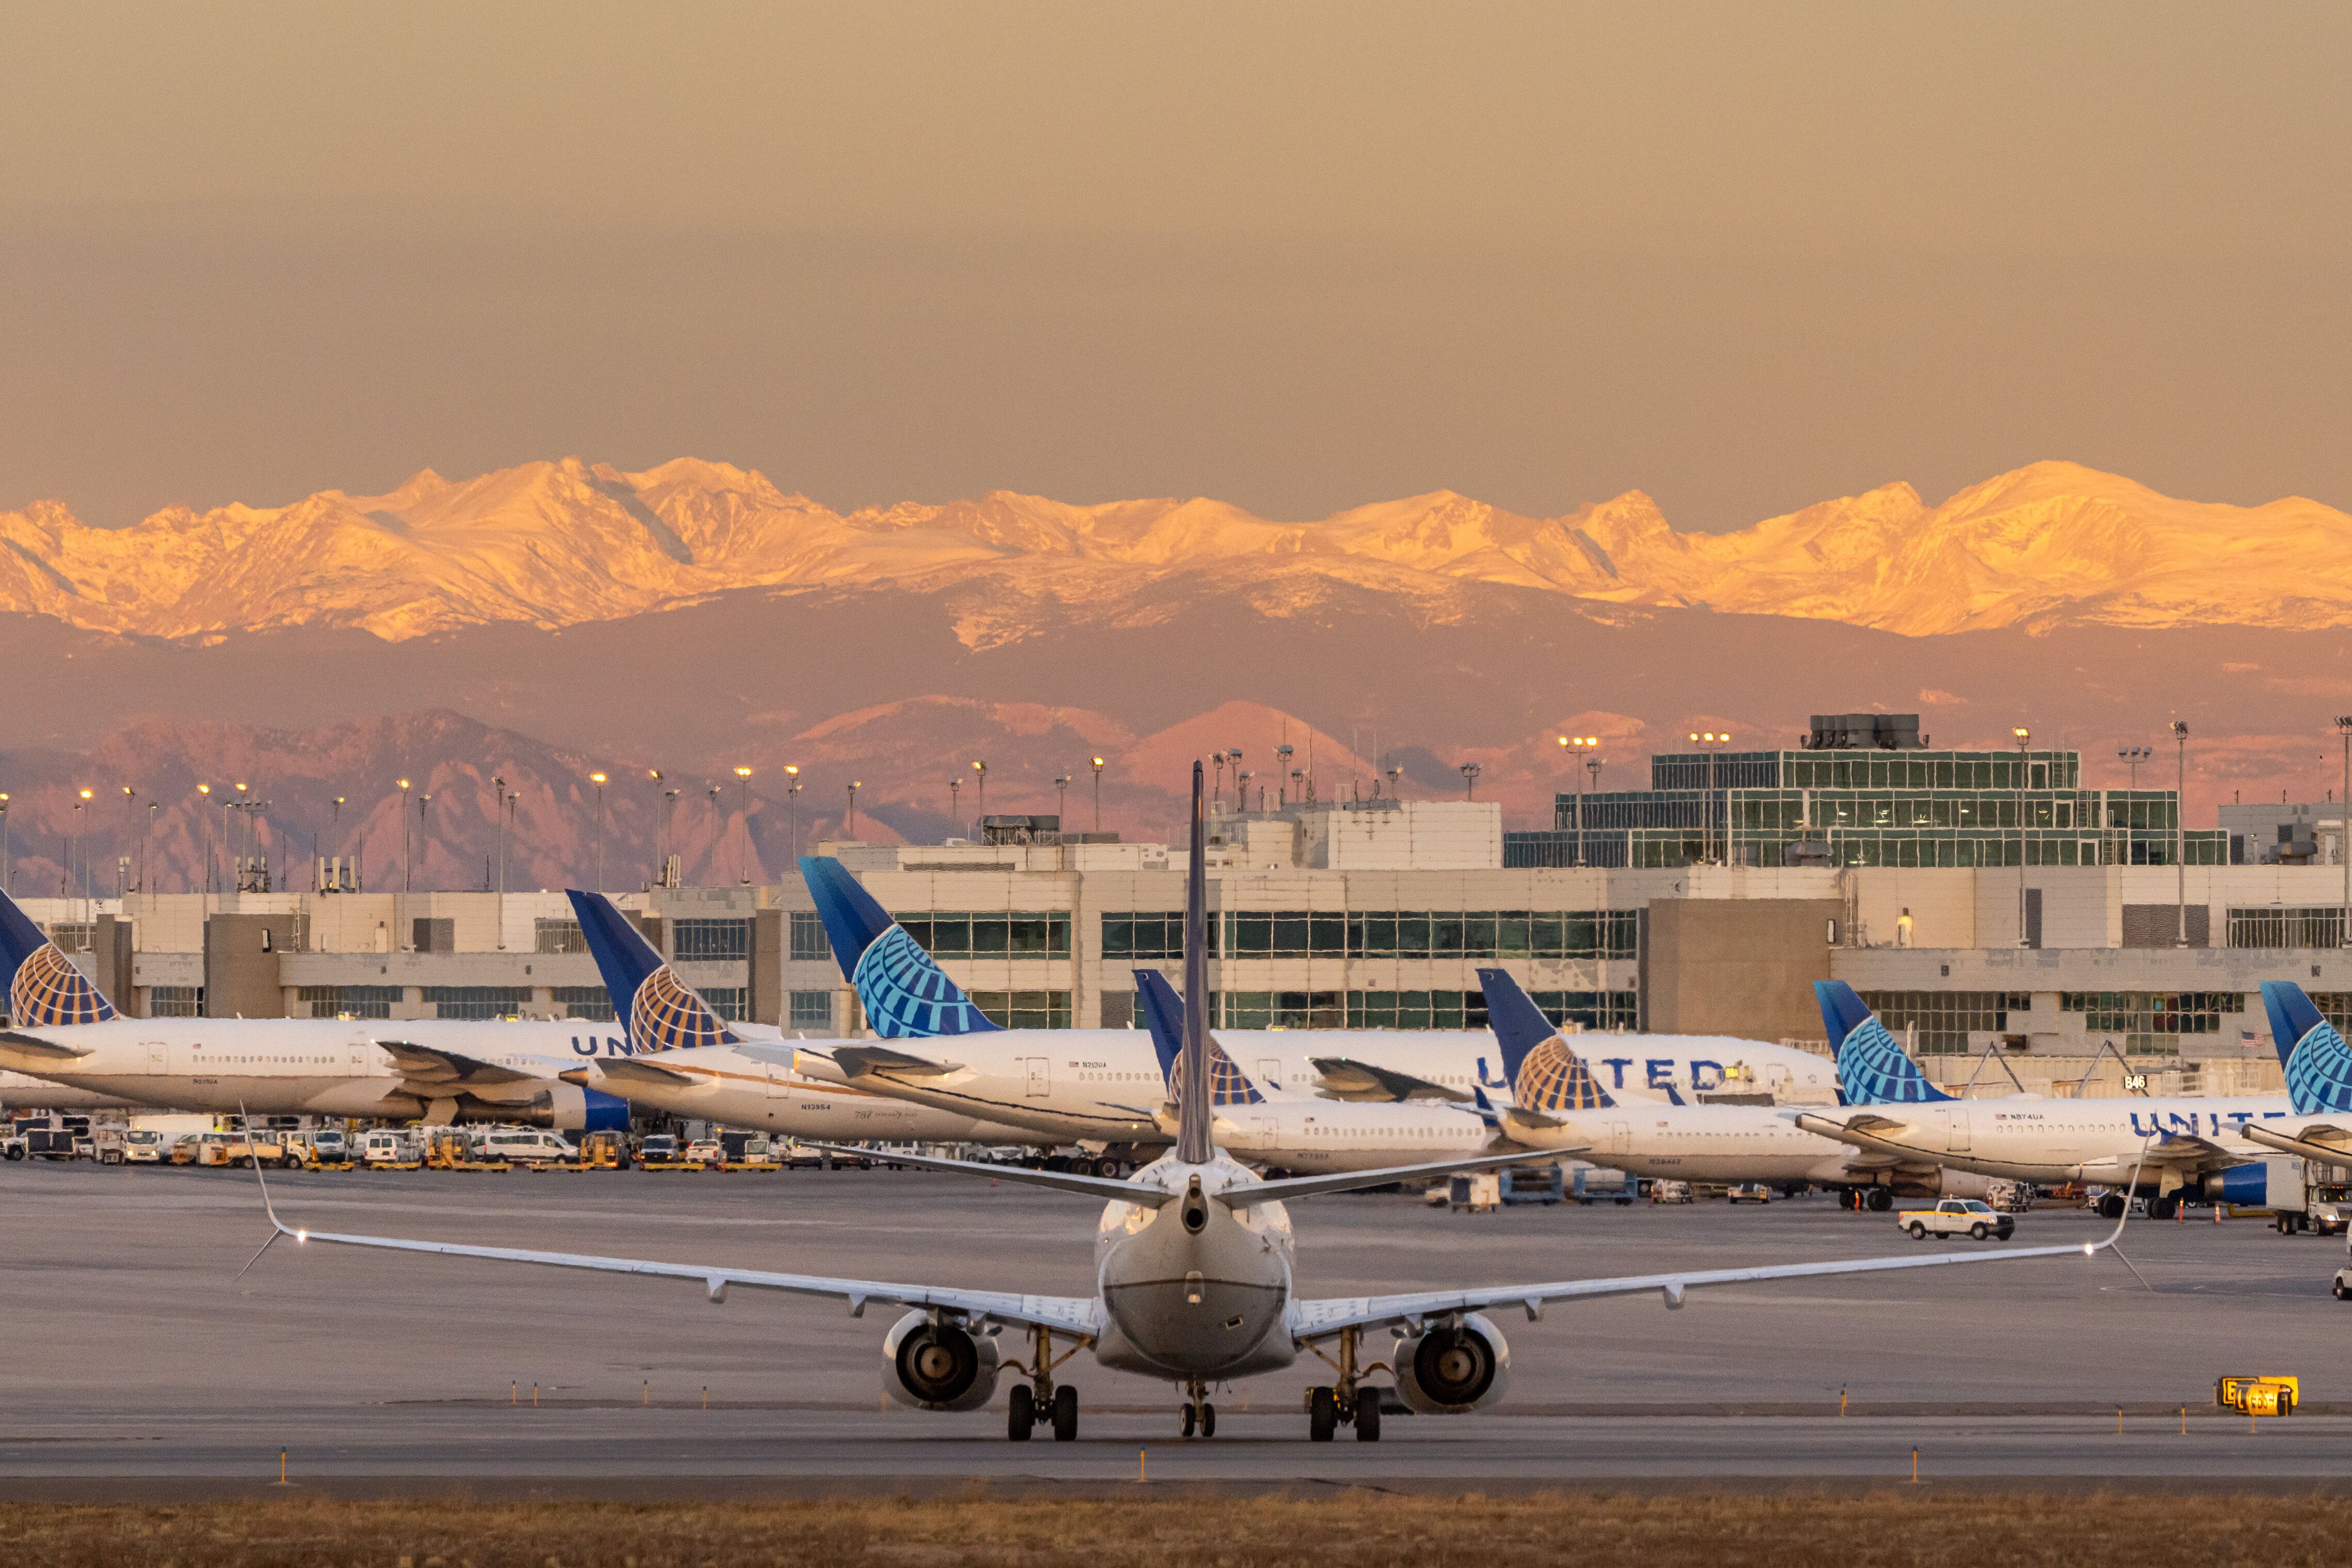 United Airlines planes in front of the mountains at Denver (DEN)